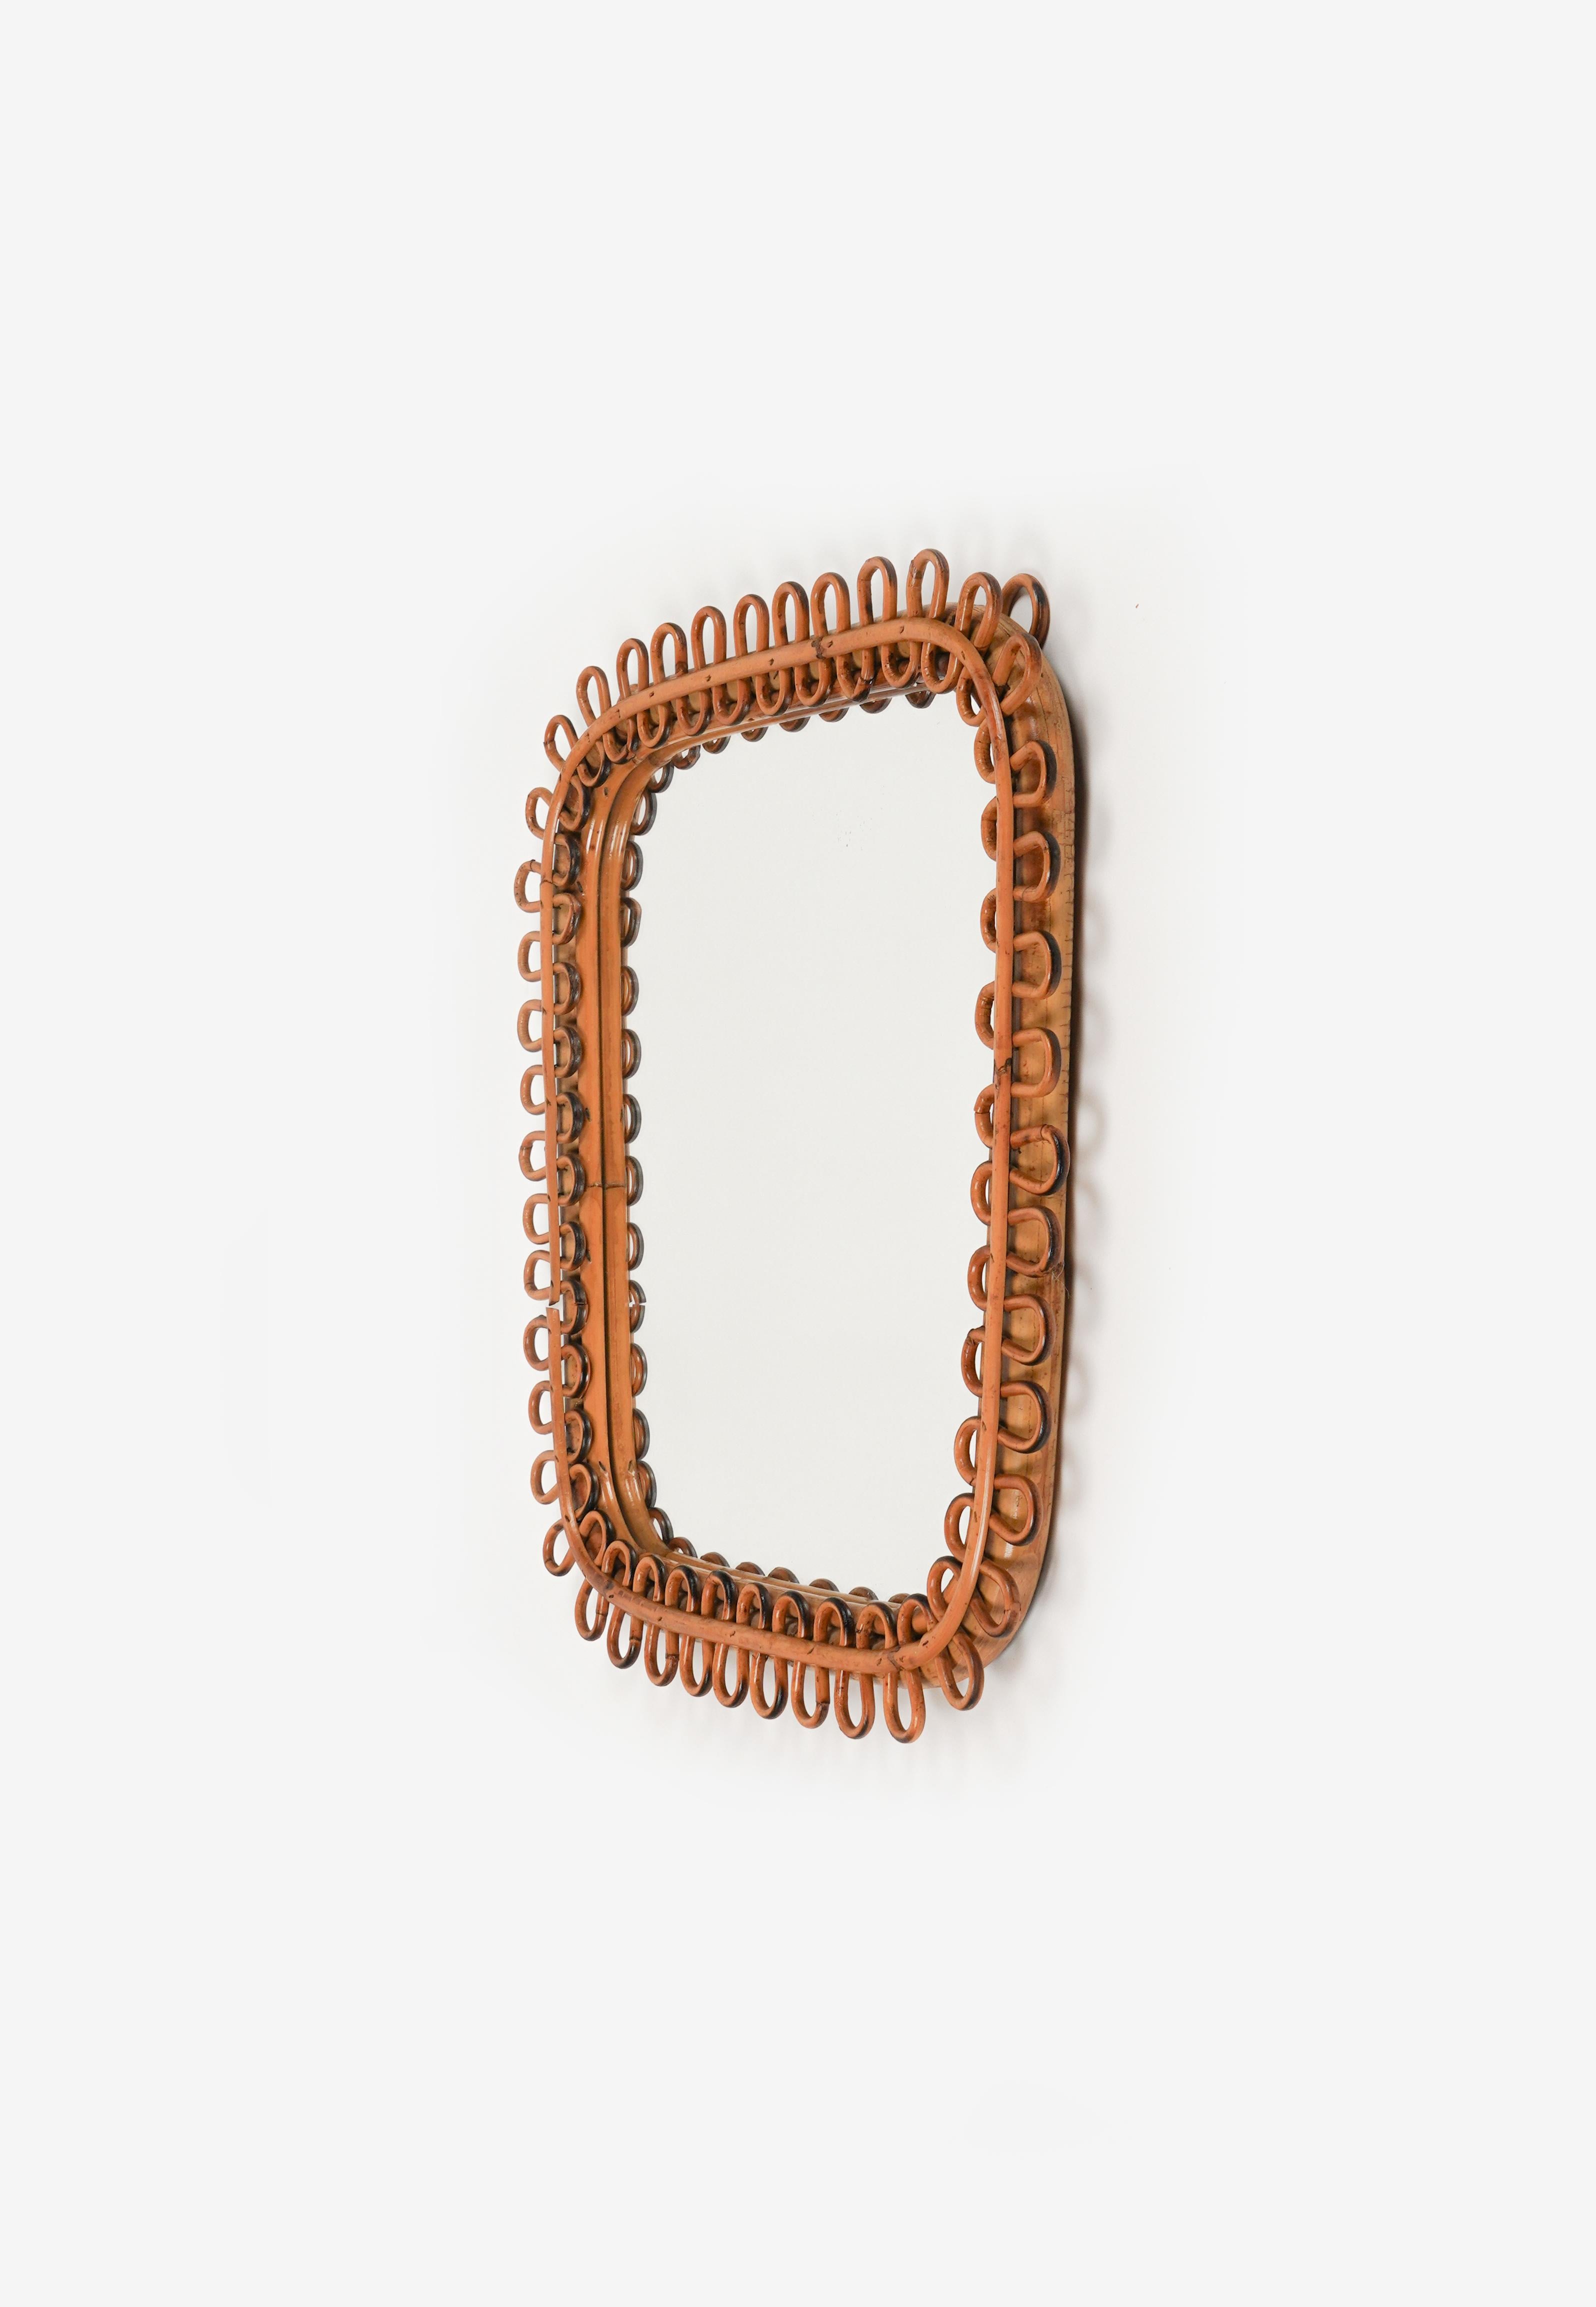 Midcentury Rattan & Bamboo Square Wall Mirror Franco Albini Style, Italy 1960s For Sale 5